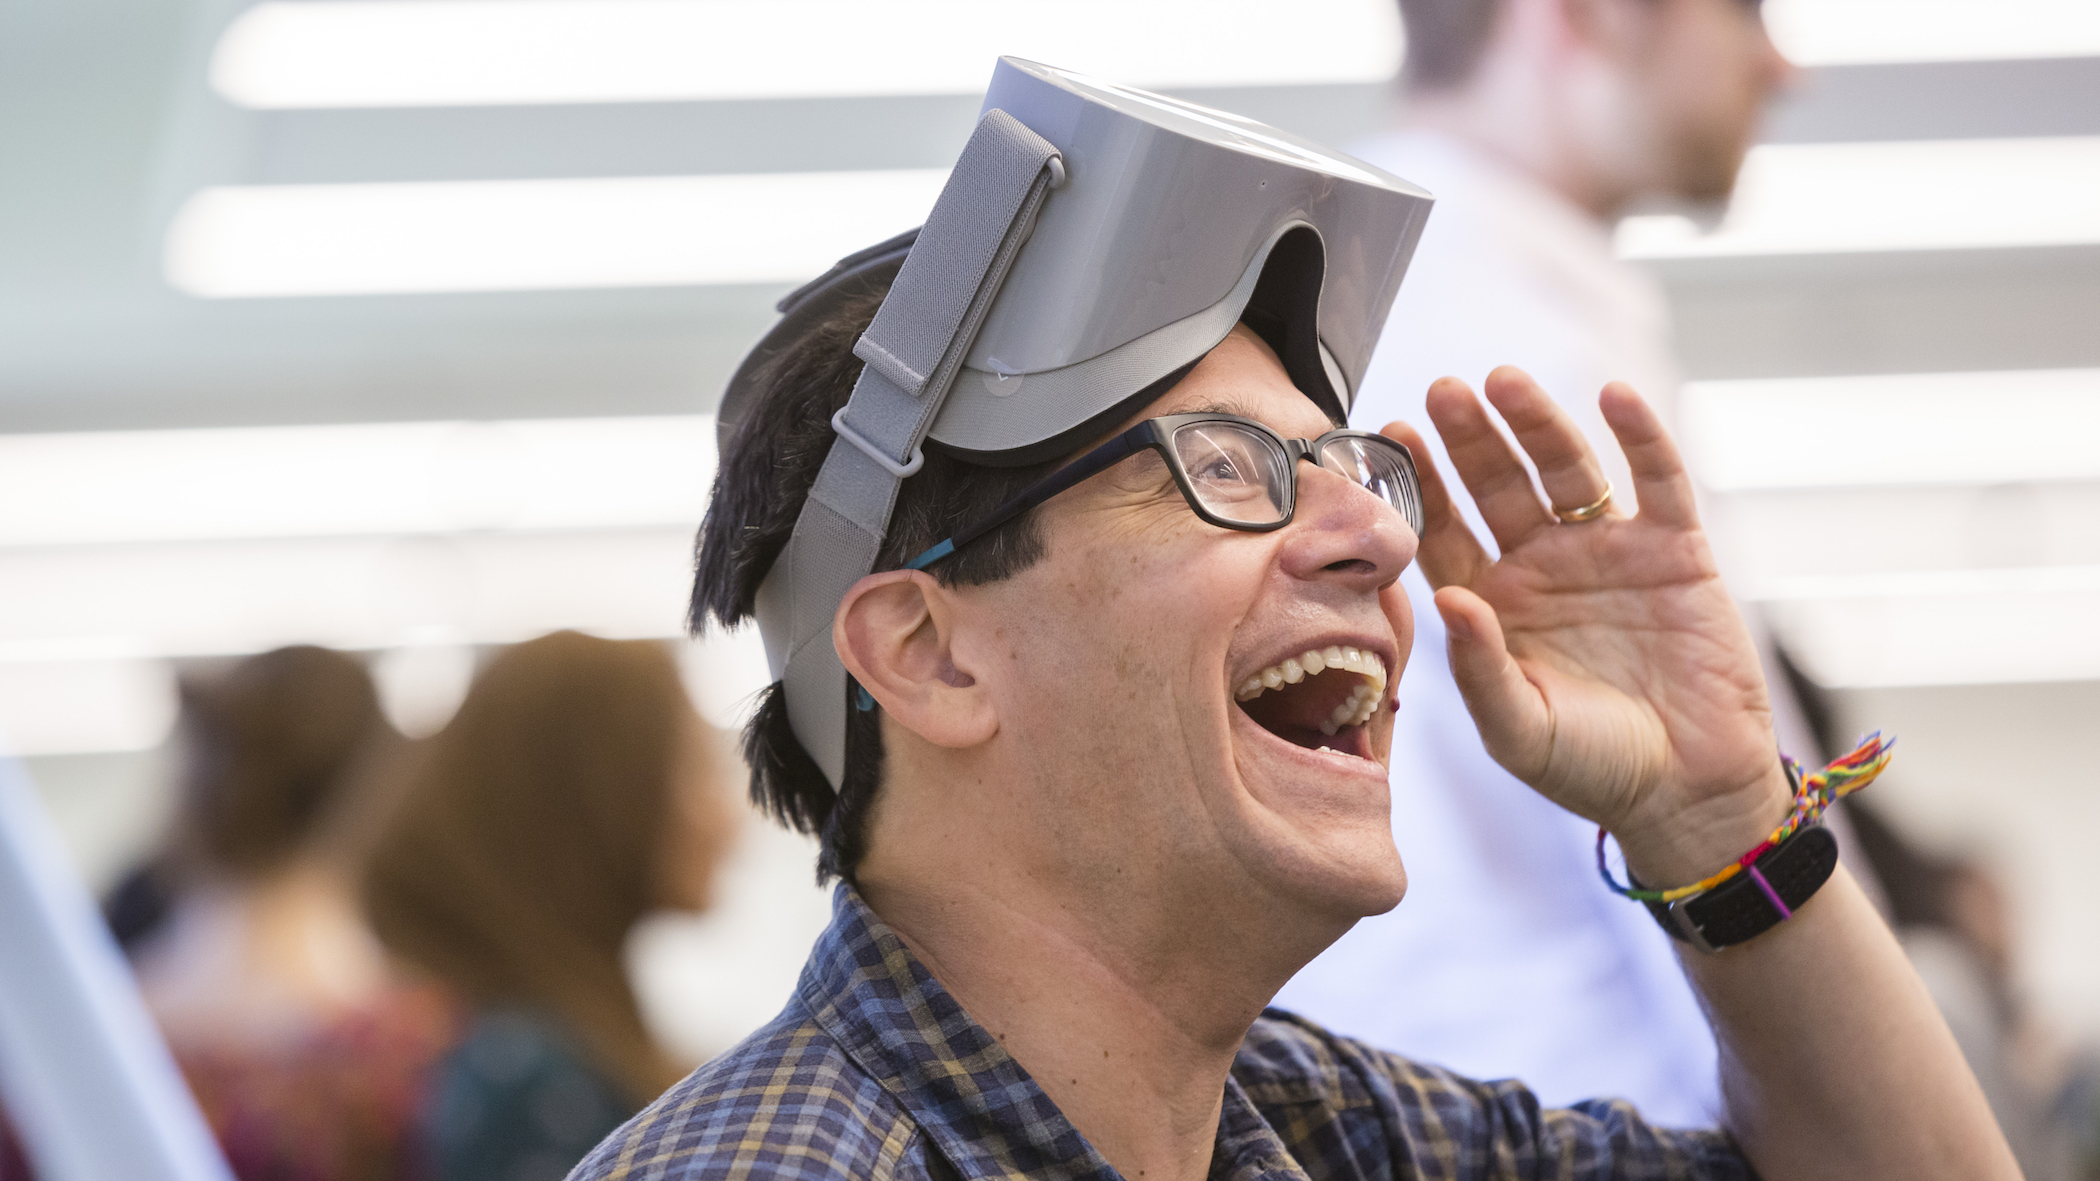 Professor Jeff Lidz, laughing out loud as he takes off a pair of VR Goggles